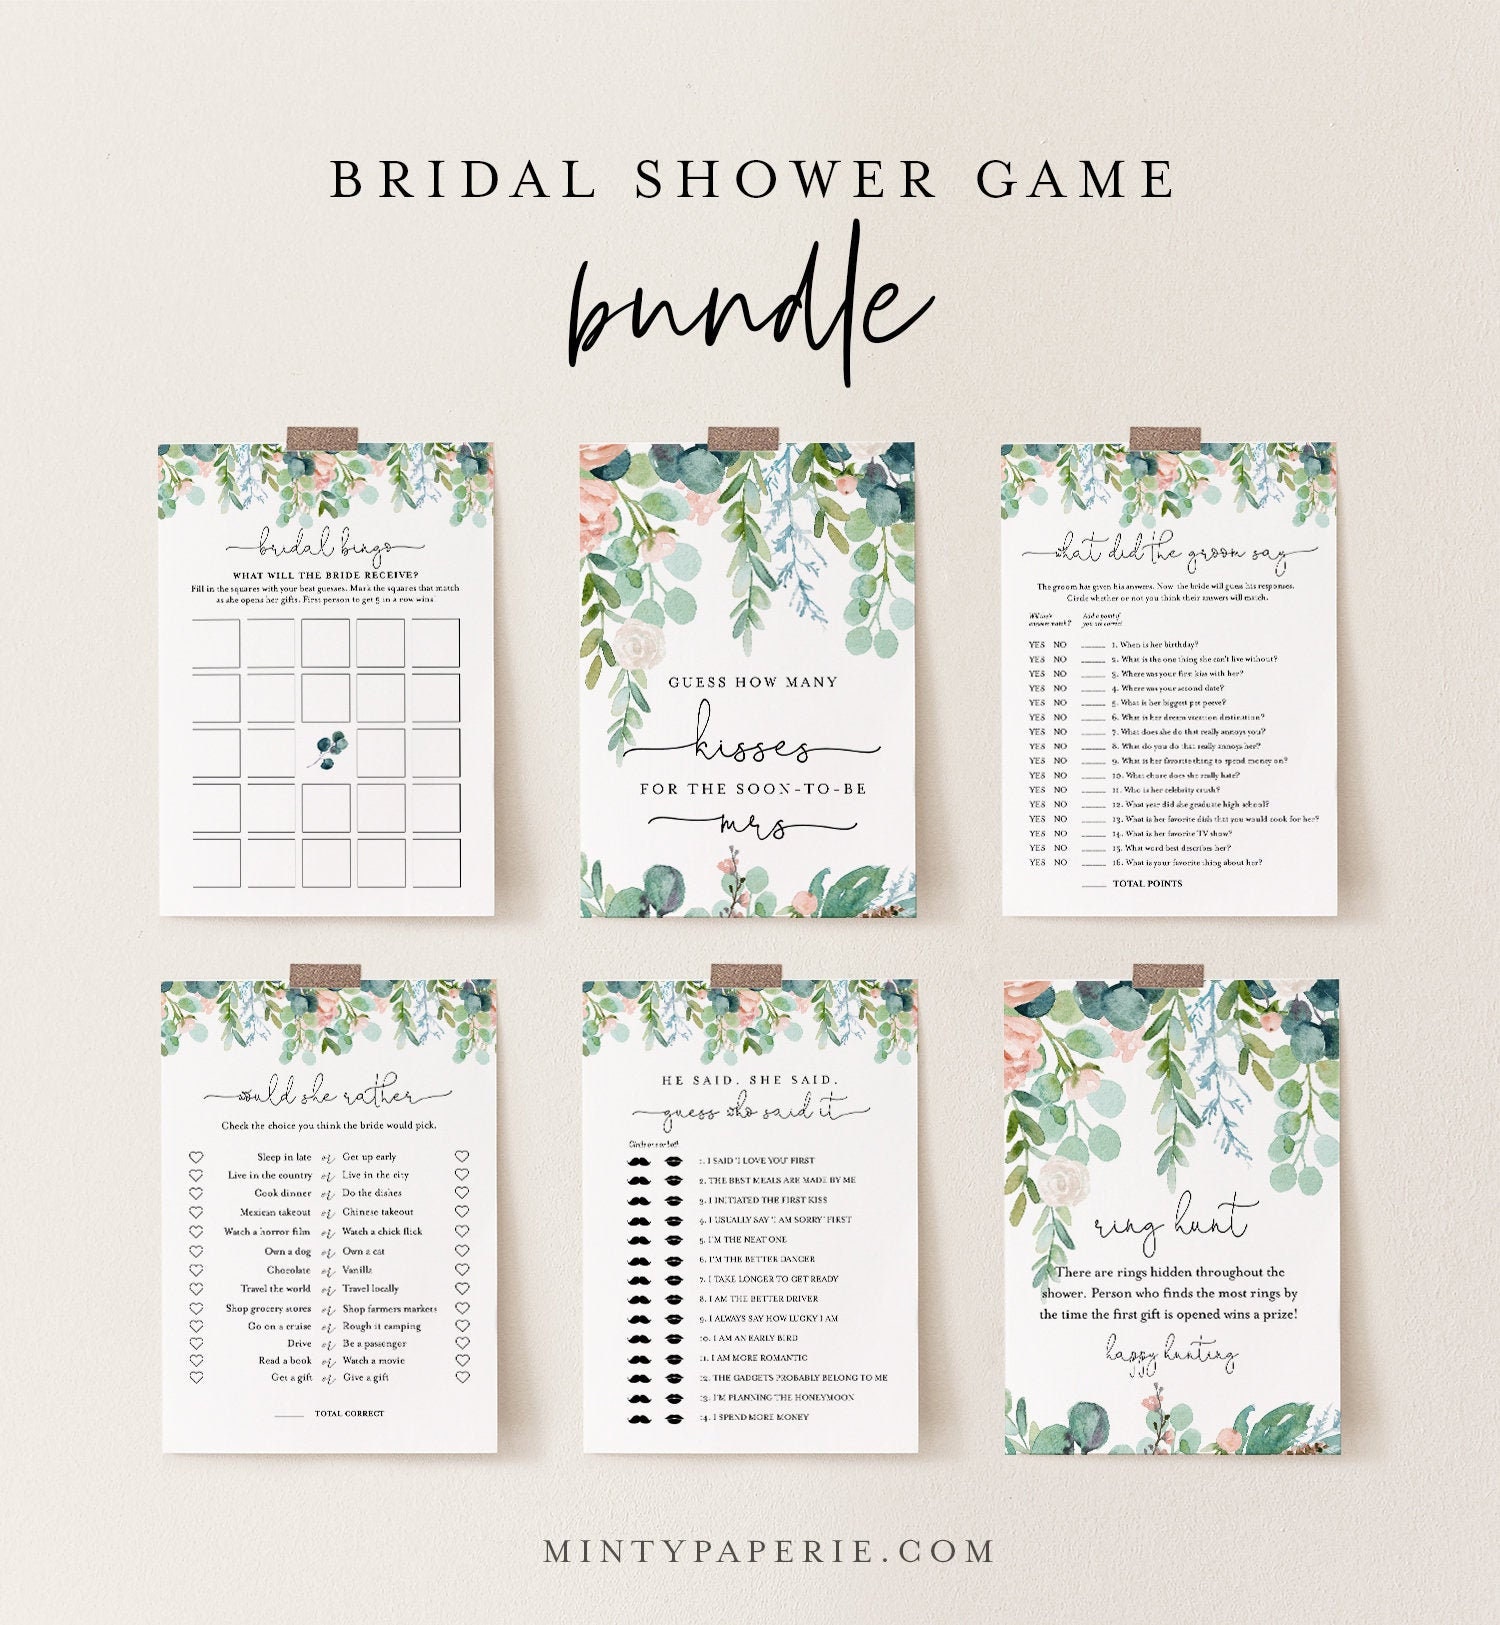 12 Bridal Shower Gifts for the Bride She'll Love